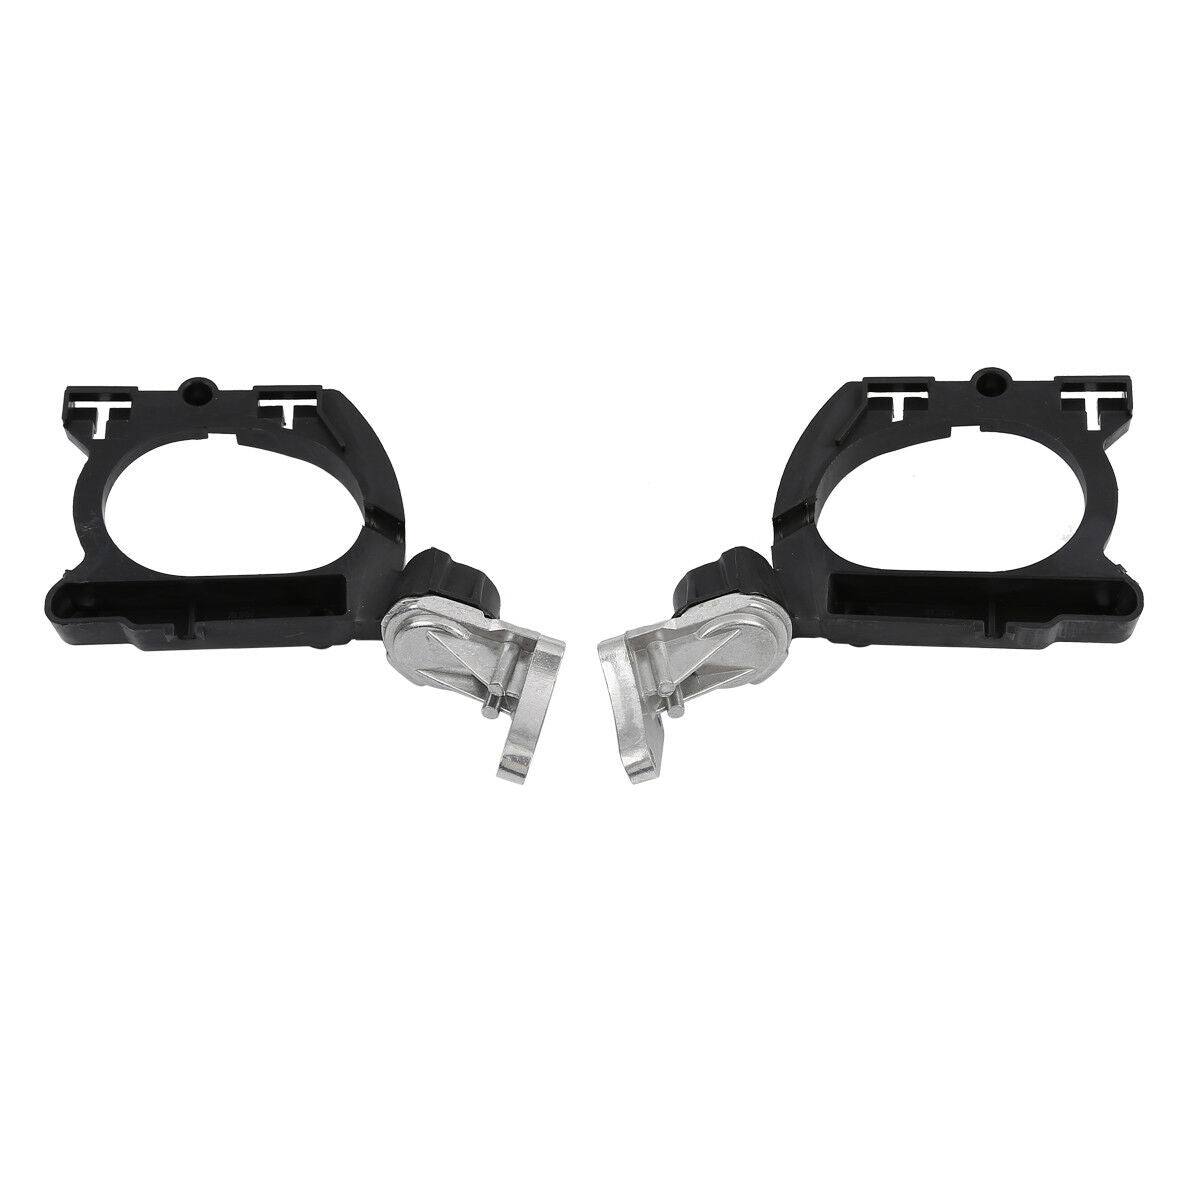 Rear View Mirror Base Mount Bracket For Honda Goldwing GL1800 2001-2013 09 10 11 - Moto Life Products